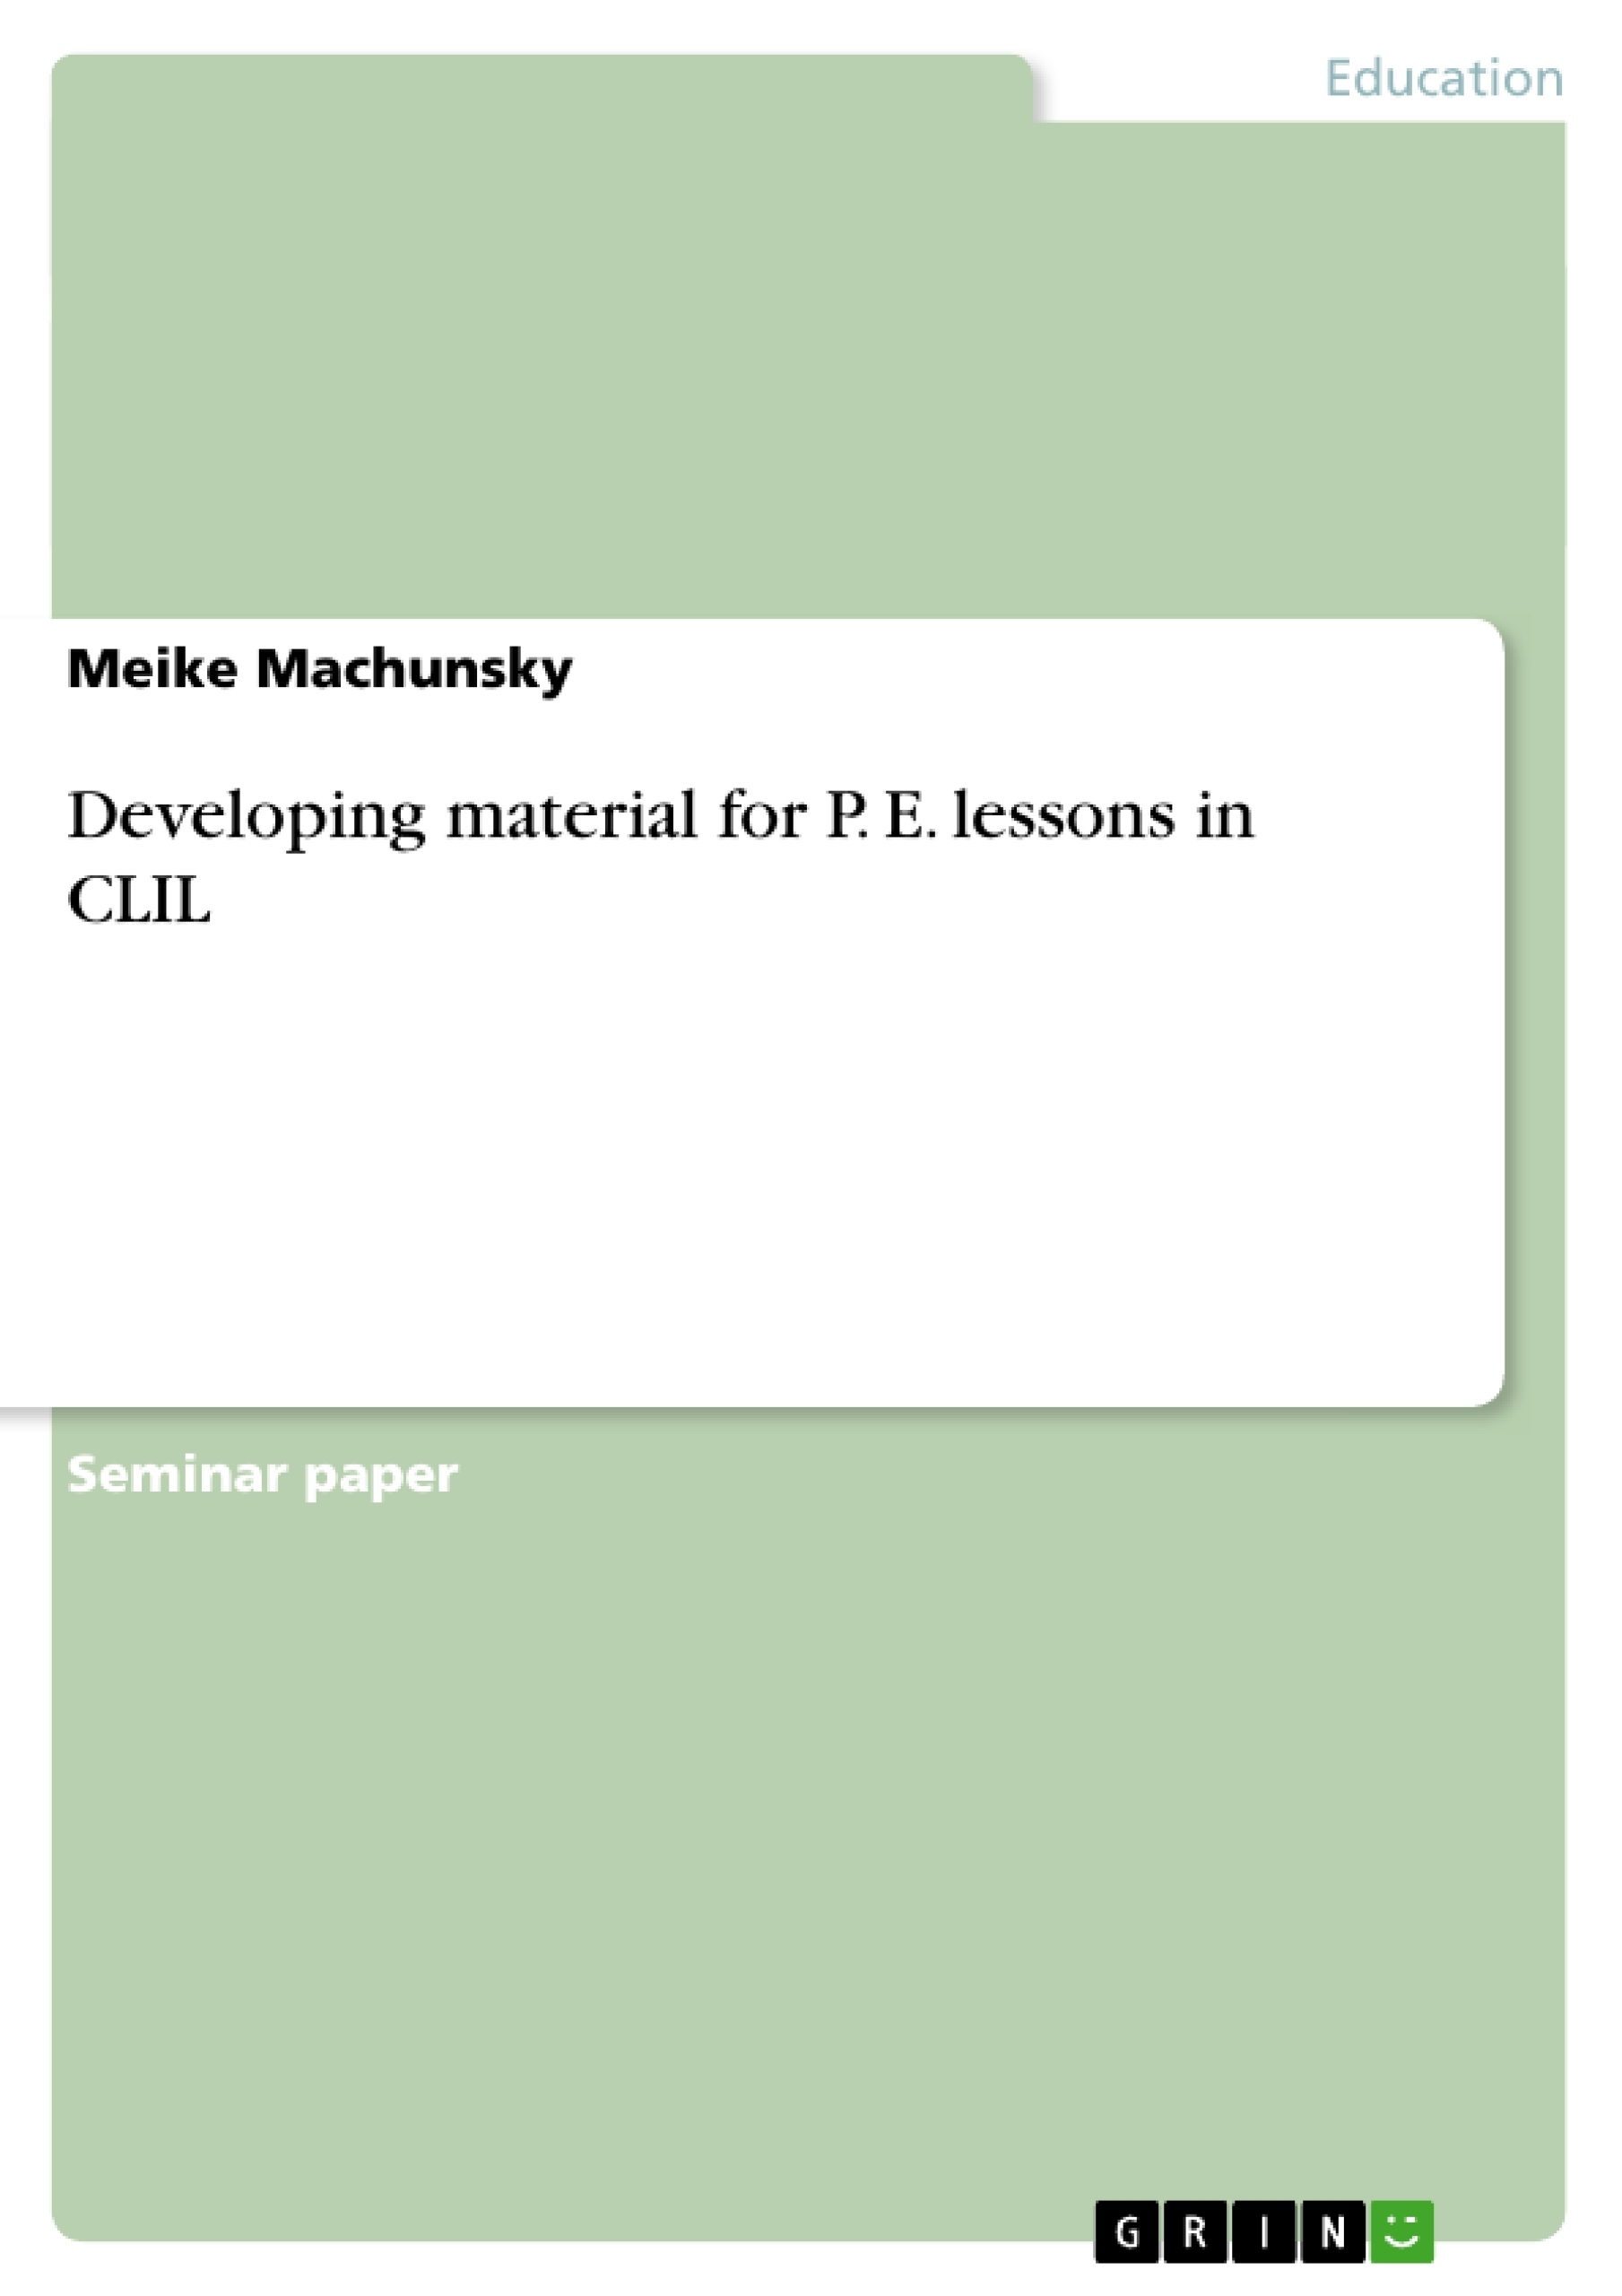 Title: Developing material for P. E. lessons in CLIL